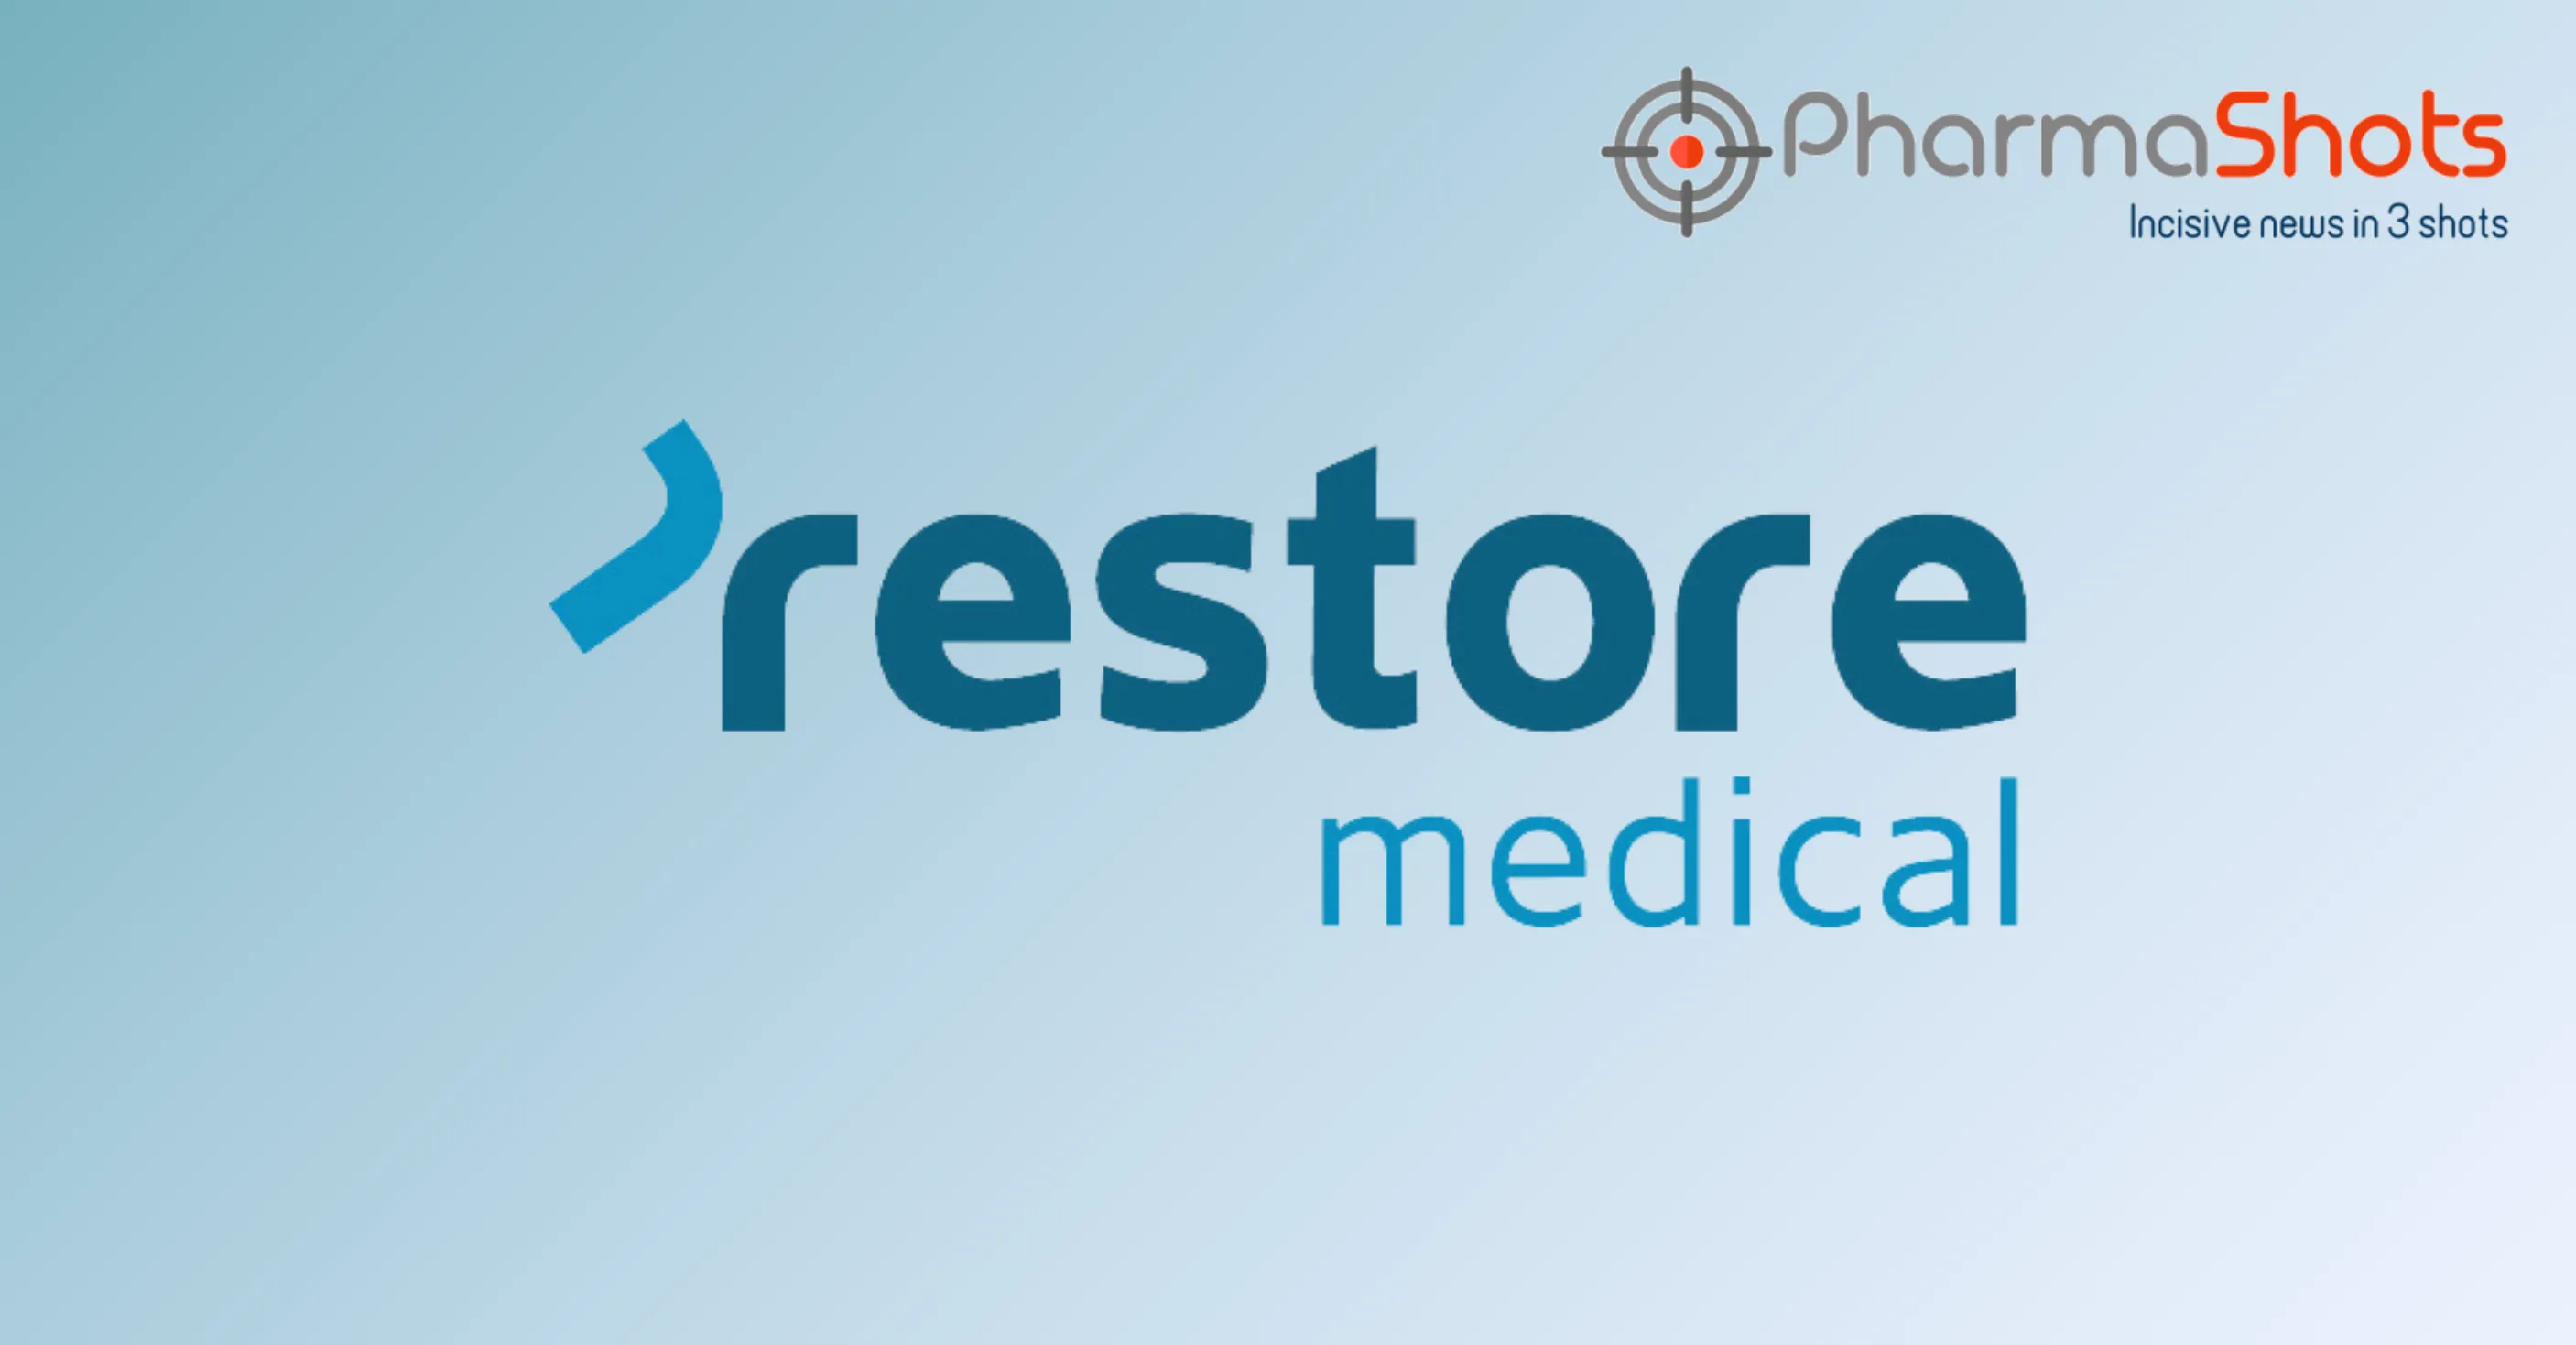 Restore Medical’s ContraBand System Gains the US FDA’s Breakthrough Device Designation for Heart Failure with Reduced Ejection Fraction